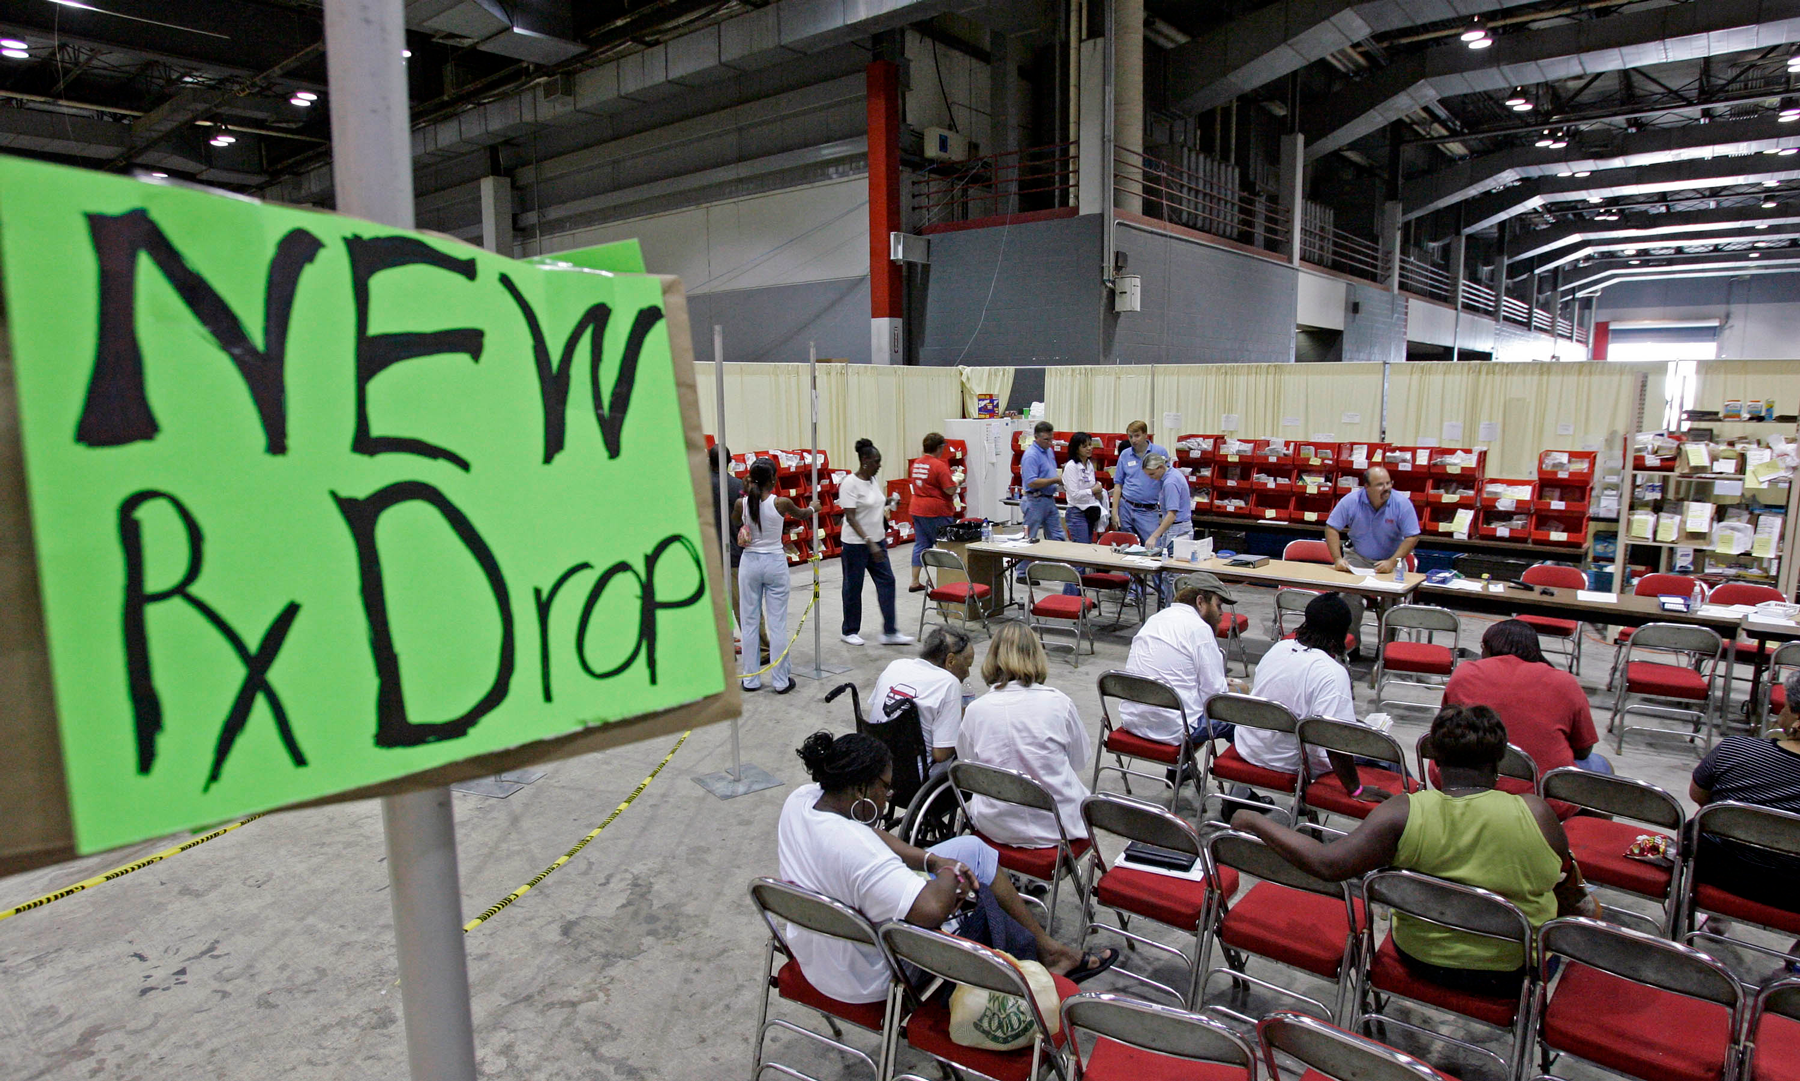 In the aftermath of Katrina, evacuees wait for their prescriptions to be filled as CVS Pharmacy sets up 24 hour service for evacuees from New Orleans at Reliant Arena on September 9, 2005 in Houston, Texas.